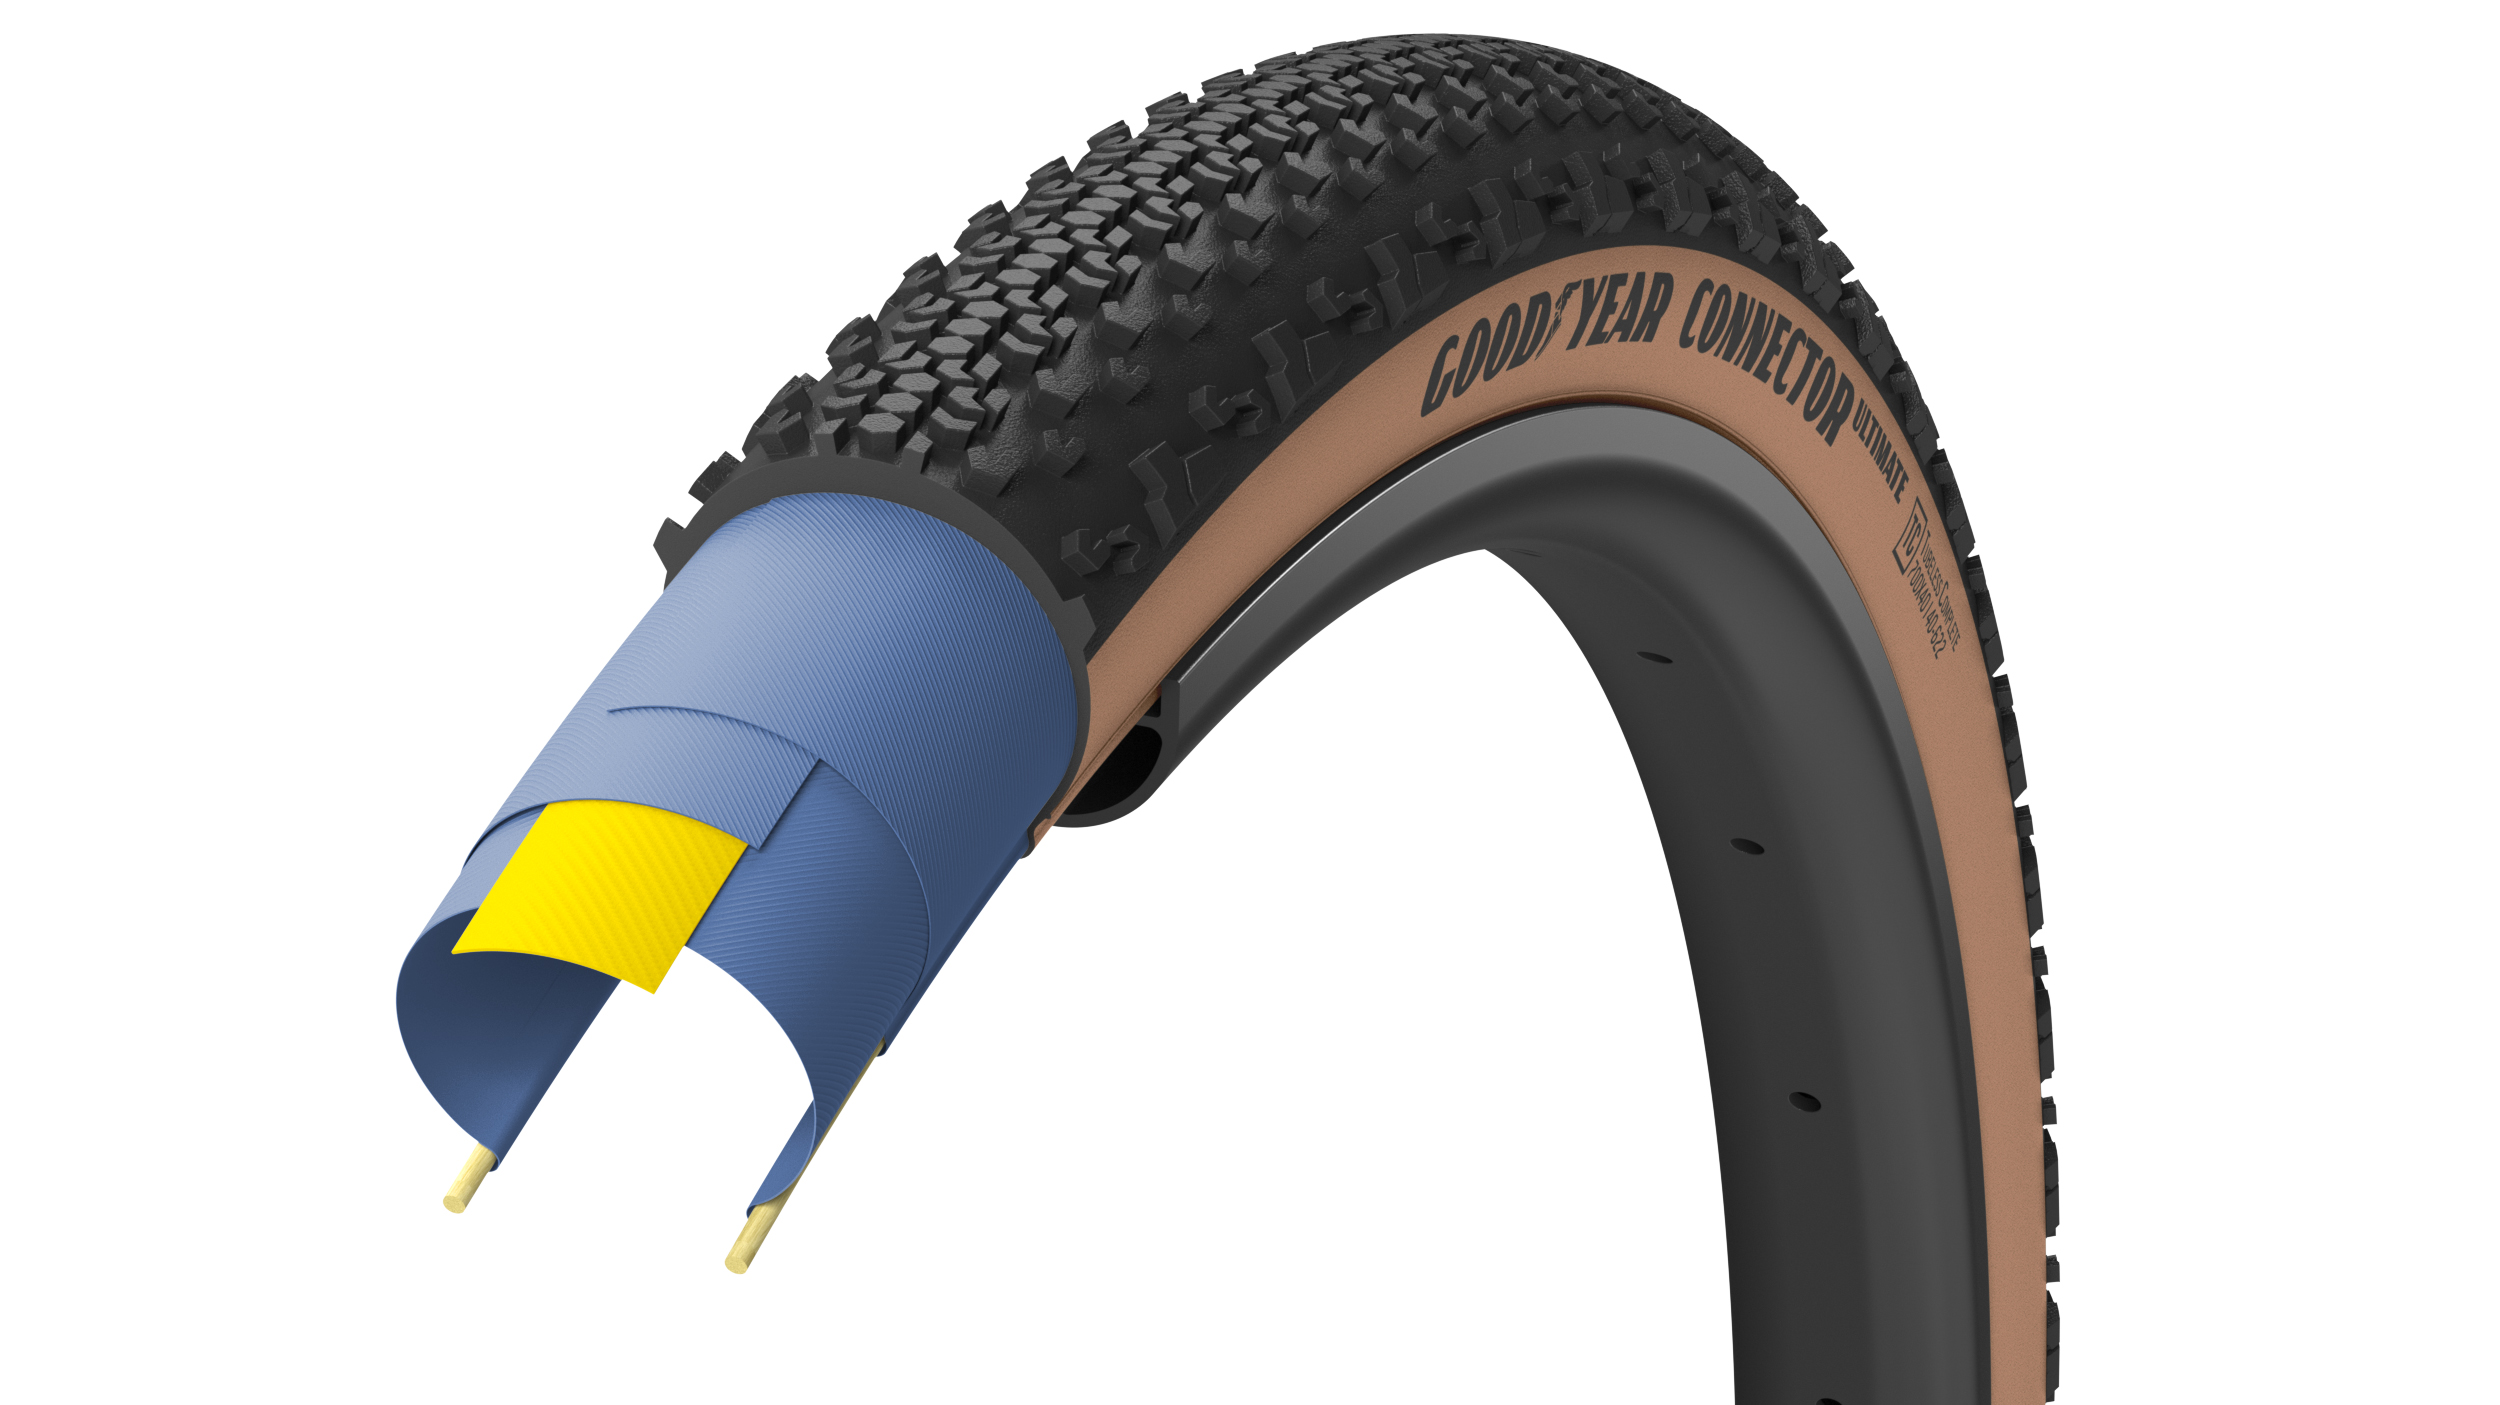 Покрышка 700x50 (50-622) GoodYear CONNECTOR Ultimate Tubeless Complete, Blk/Tan фото 